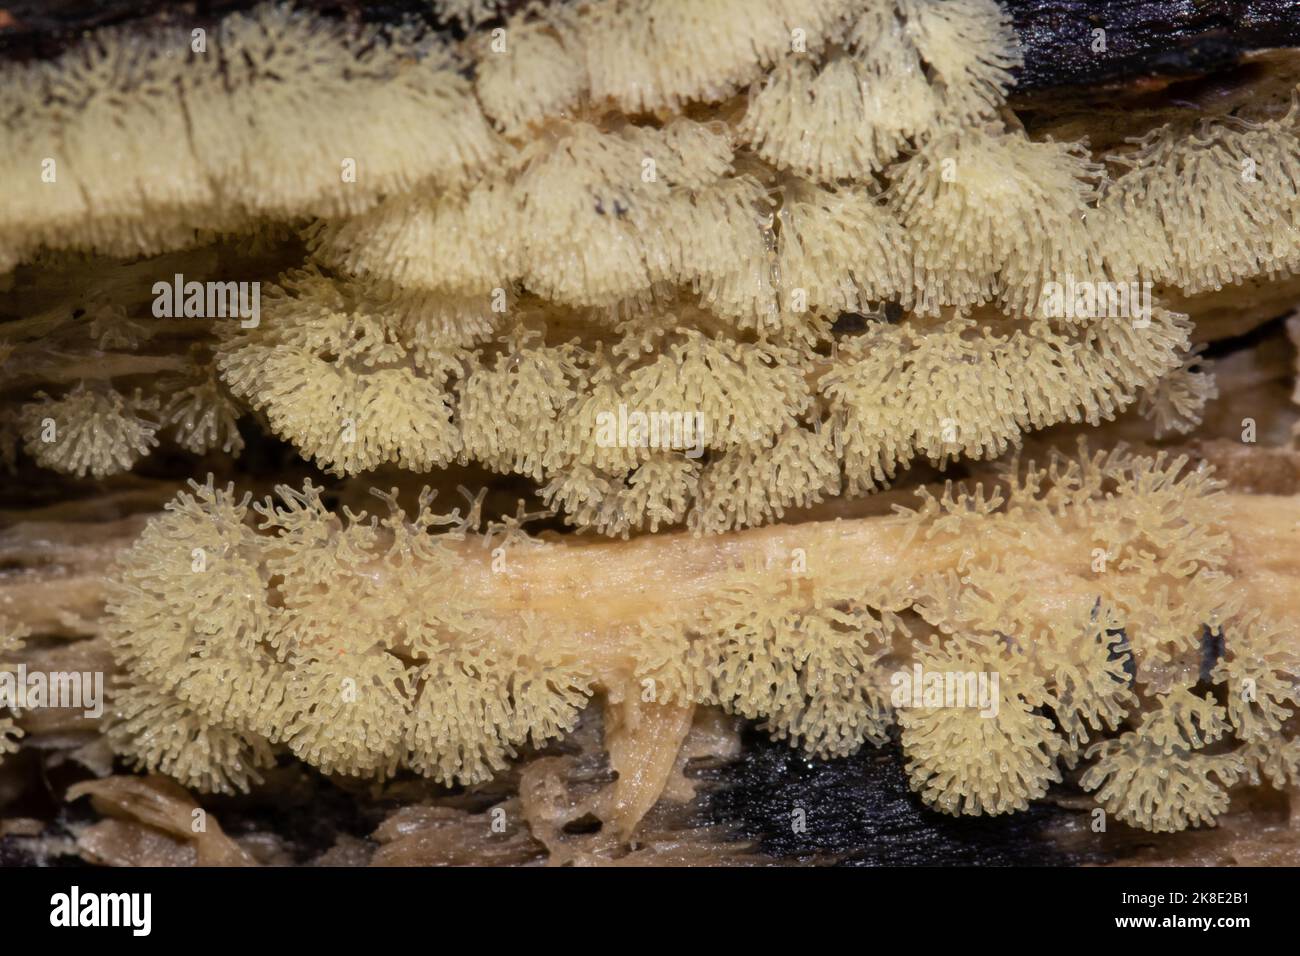 Antler-shaped slime mould grey fruiting body with many branches on tree trunk Stock Photo